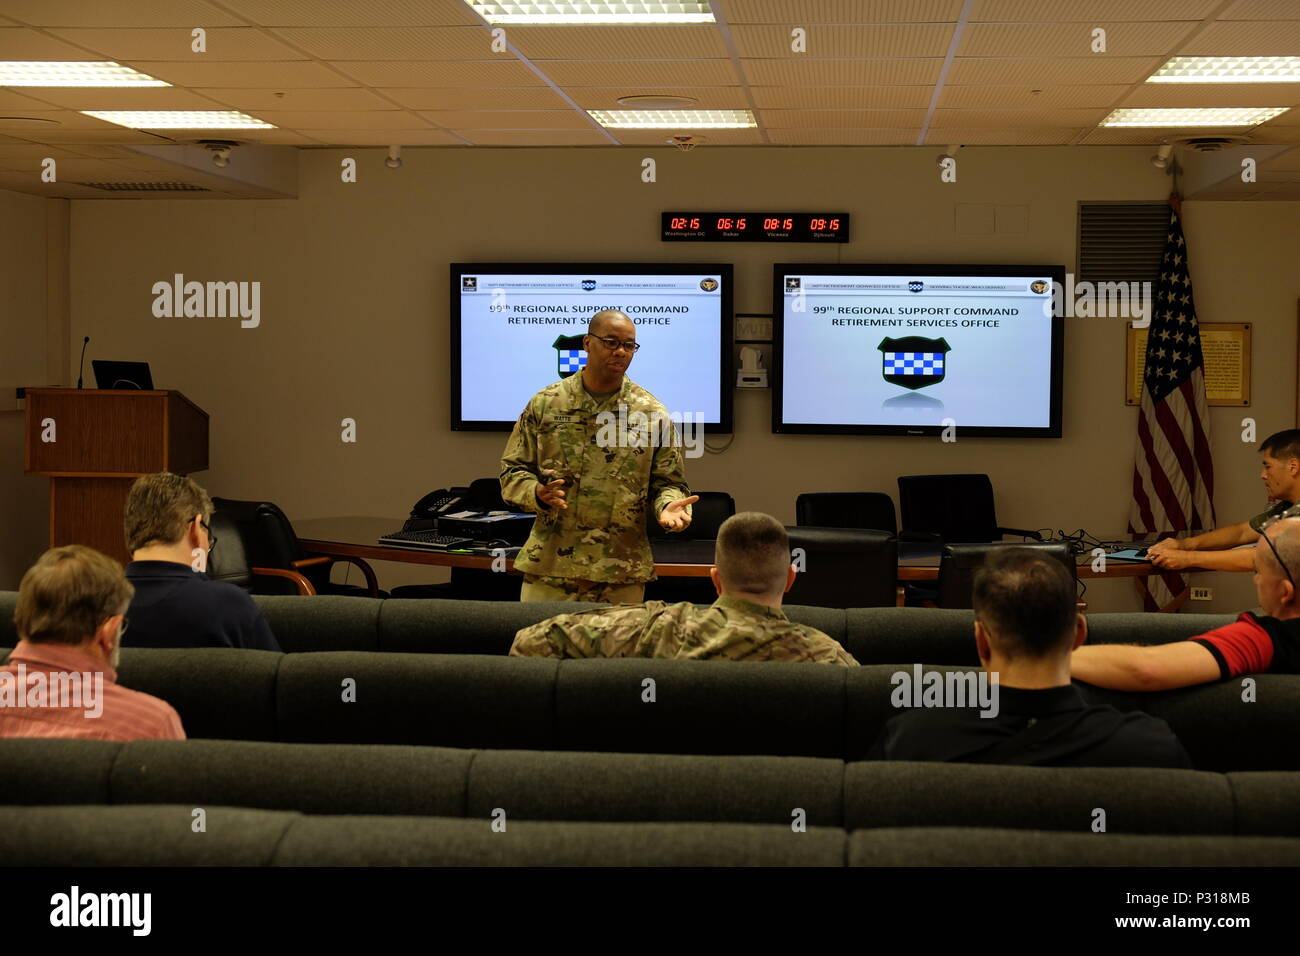 VICENZA, Italy – Master Sgt. Kevin Watts, noncommissioned officer in charge, Retirement Services Office, 99th Regional Support Command, speaks during the 7th Mission Support Command hosted bi-annual 99th RSC RSO preretirement brief, Aug. 20, 2016 Stock Photo